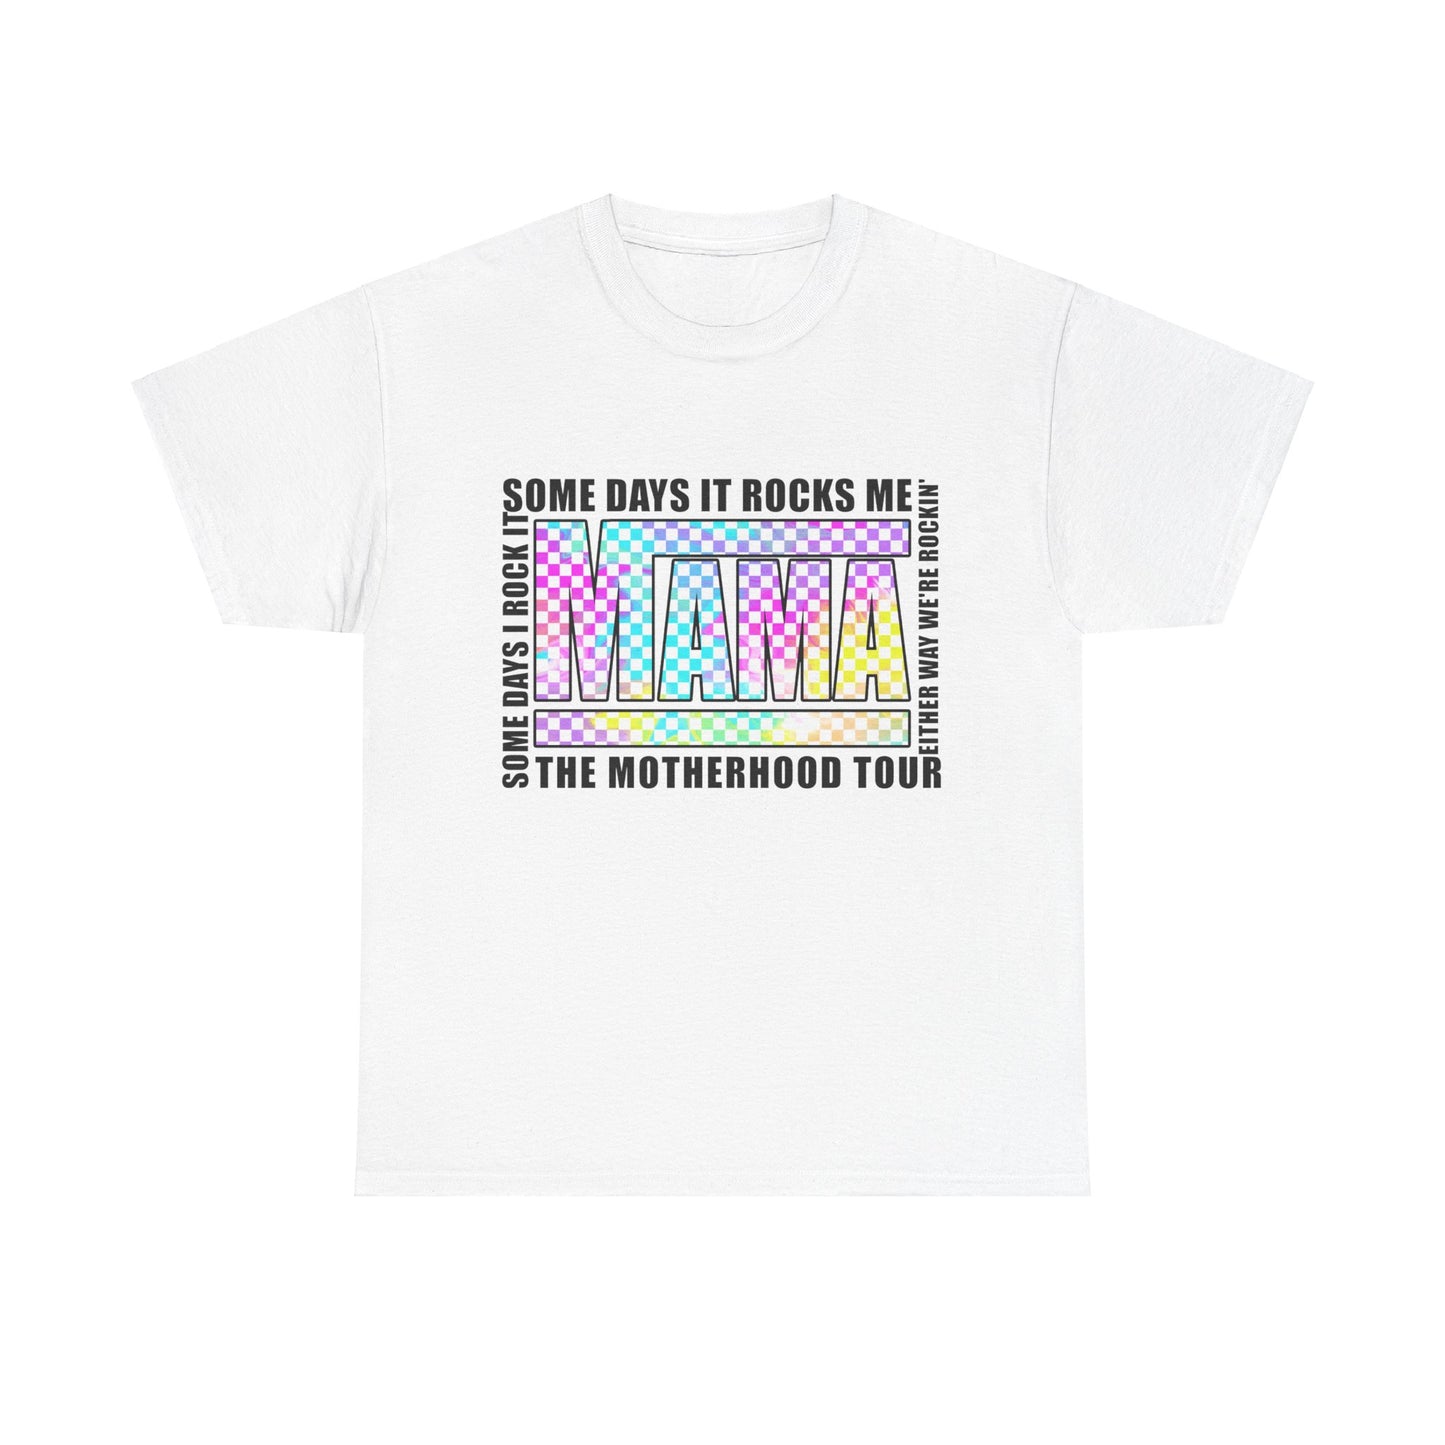 Motherhood some days I rock it,Sassy Quote Tee, Funny Statement,Edgy Fashion Statement Quirky Outfit